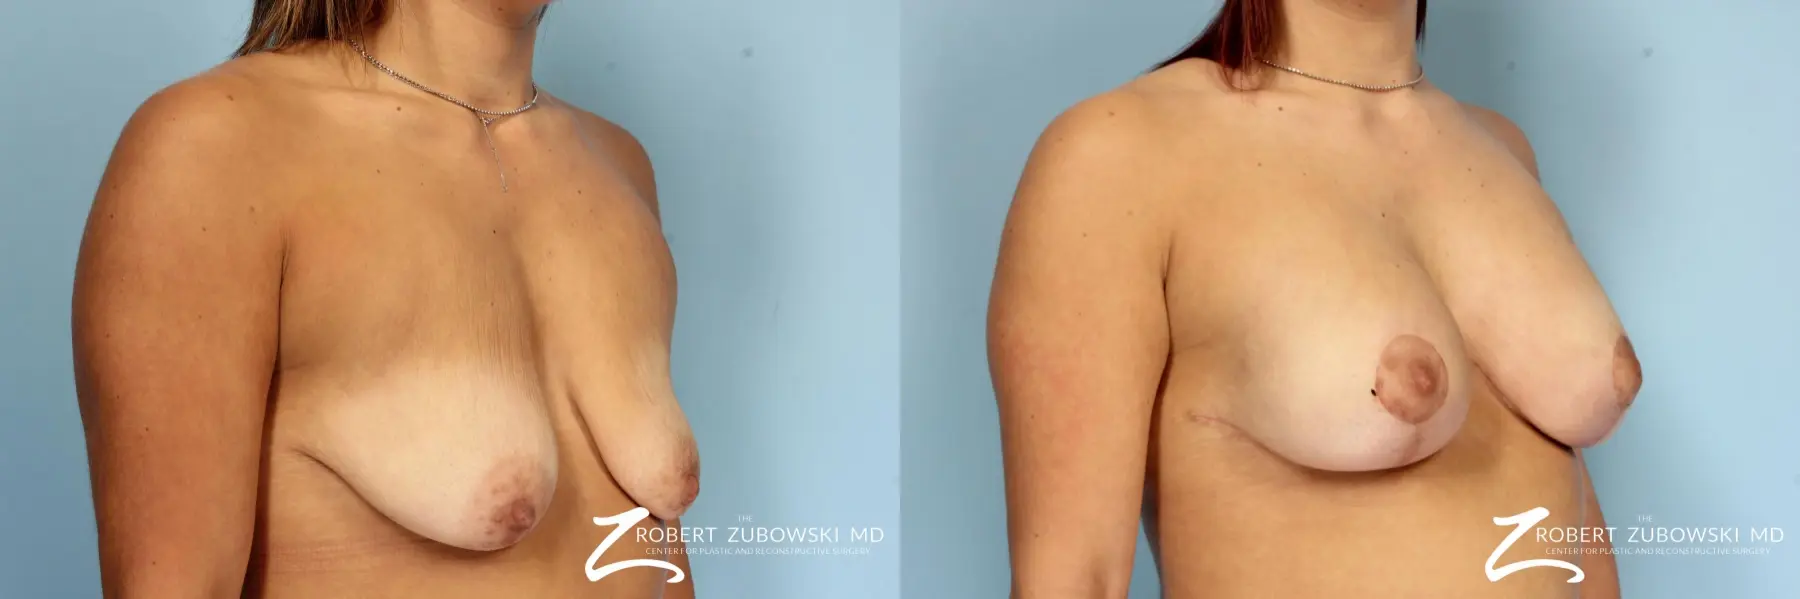 Breast Lift And Augmentation: Patient 9 - Before and After 2